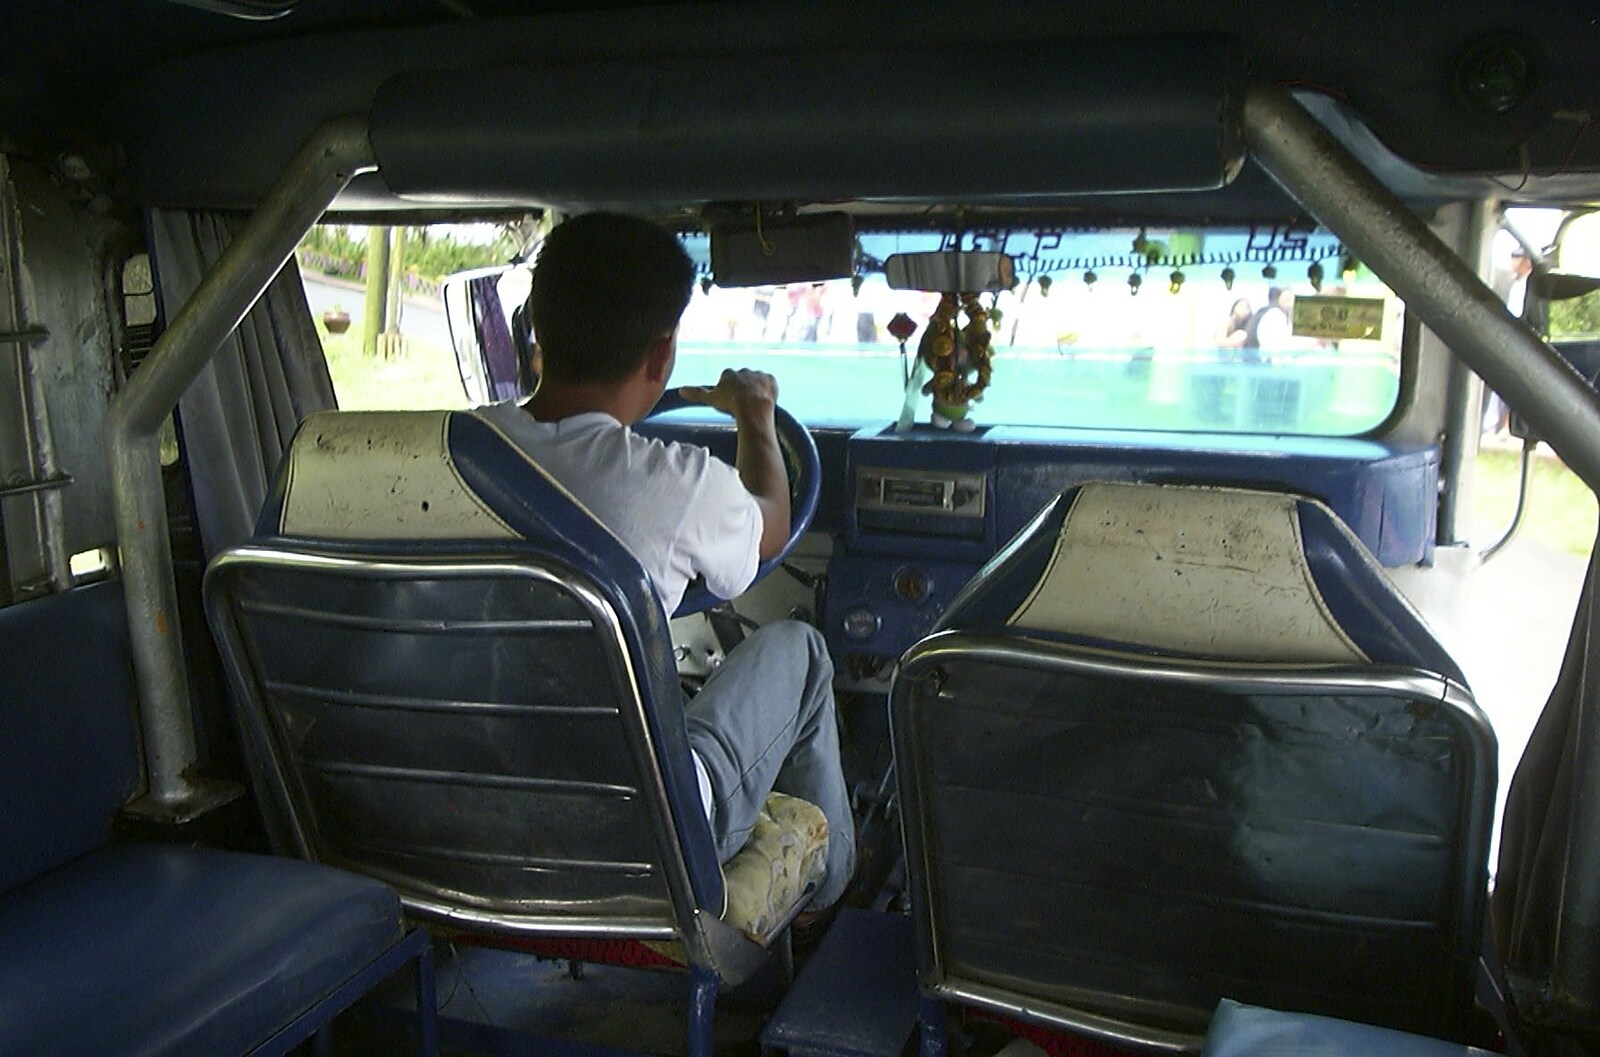 The Jeepney ride up to the park is 30 Pesos from A Postcard From Manila: a Working Trip, Philippines - 9th July 2004